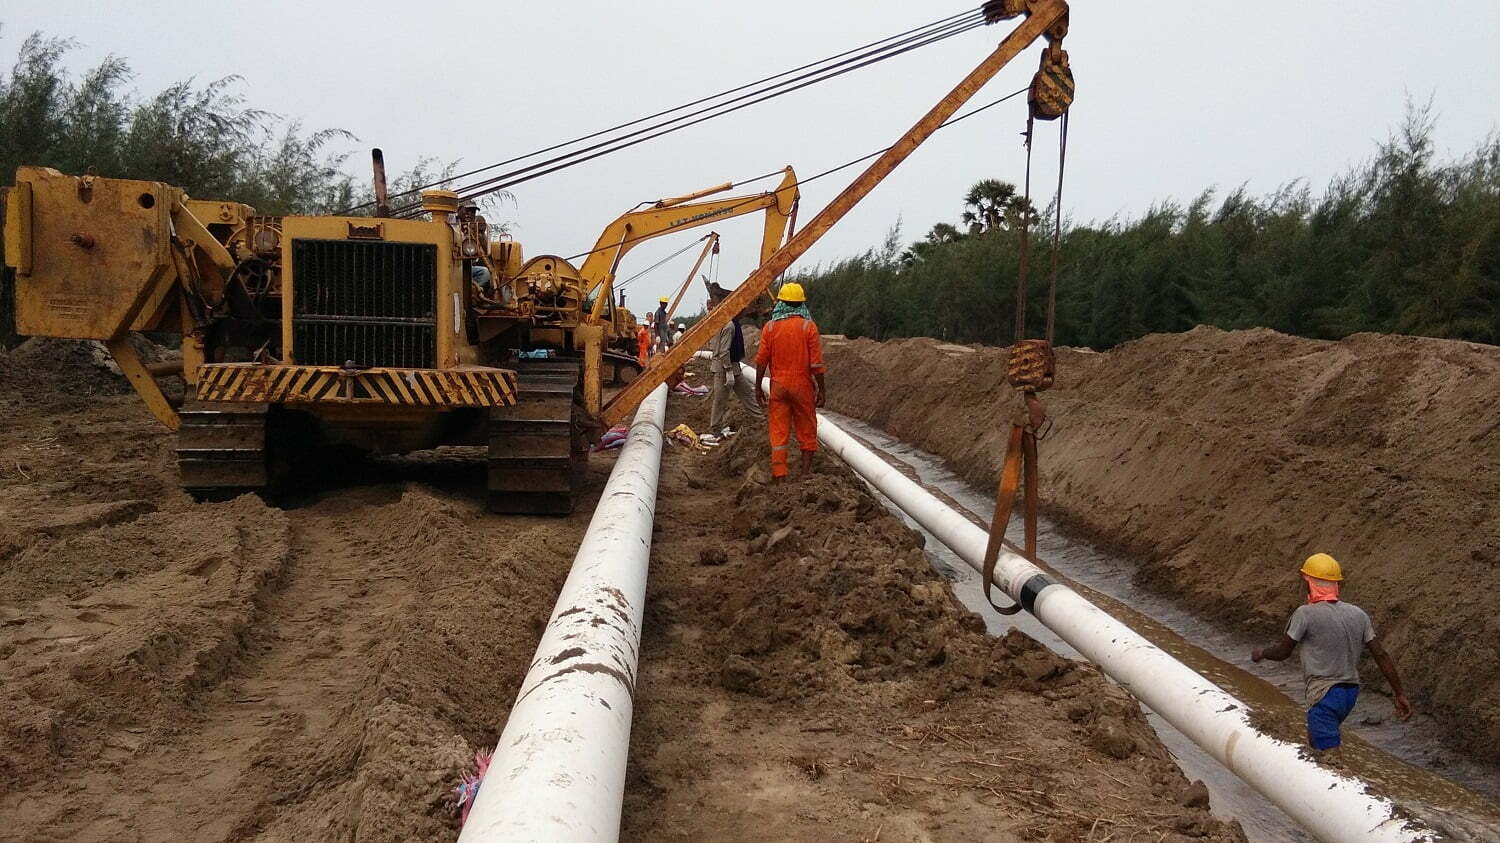 Pipeline construction process by bulldozer